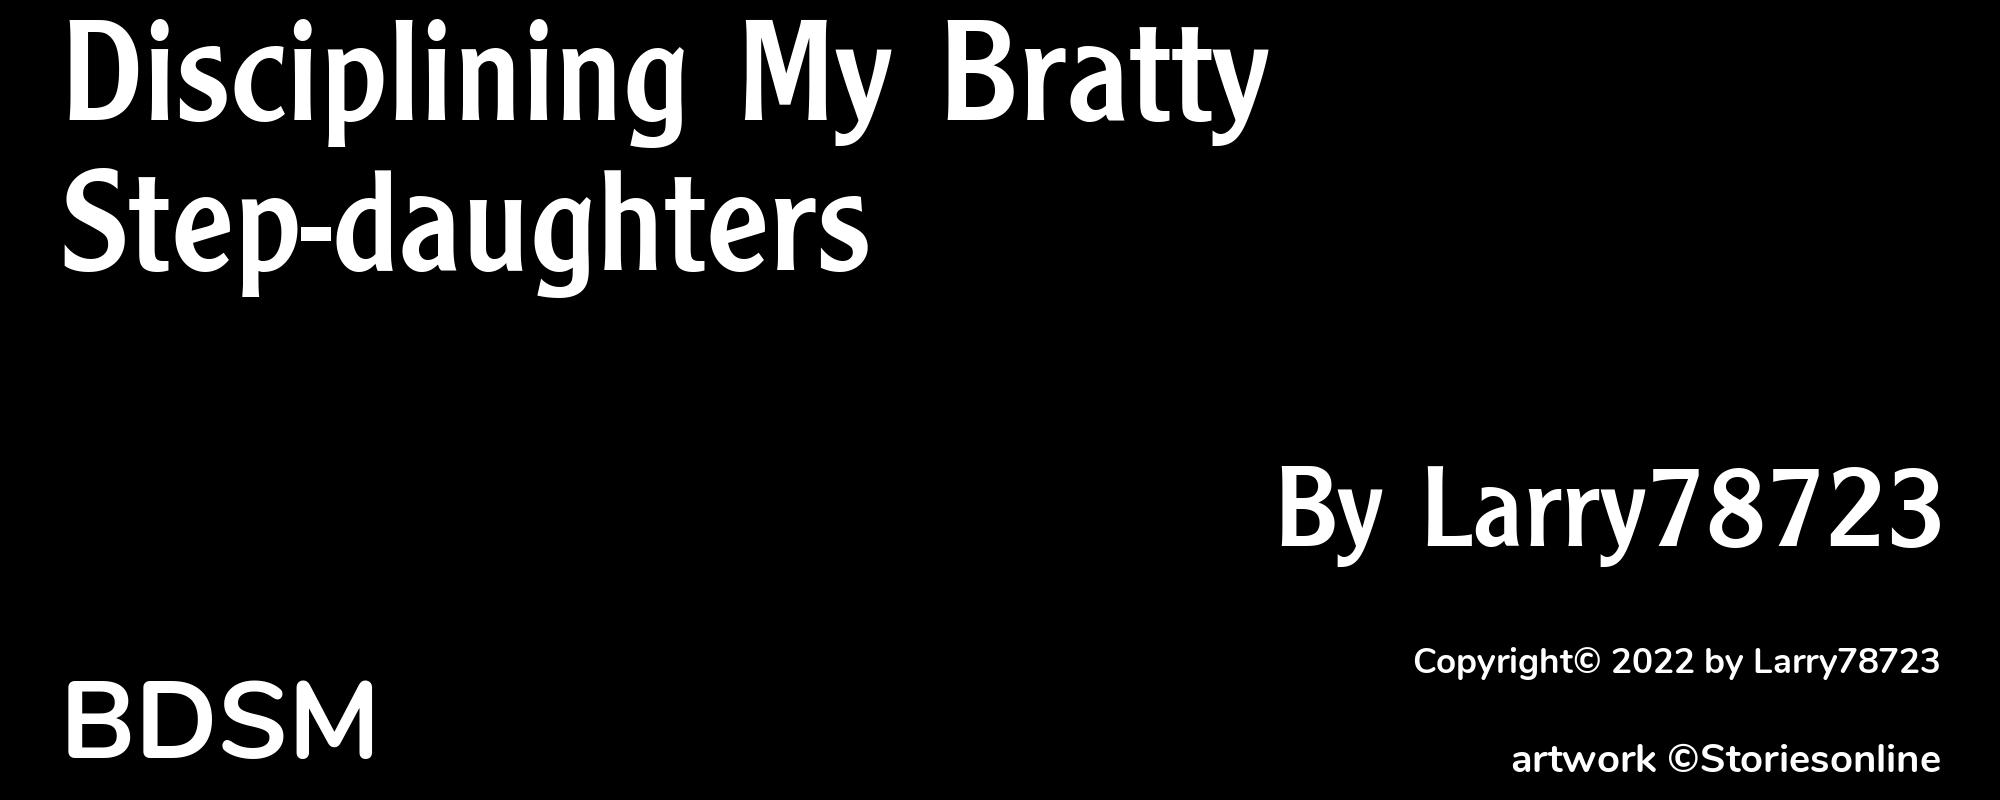 Disciplining My Bratty Step-daughters - Cover